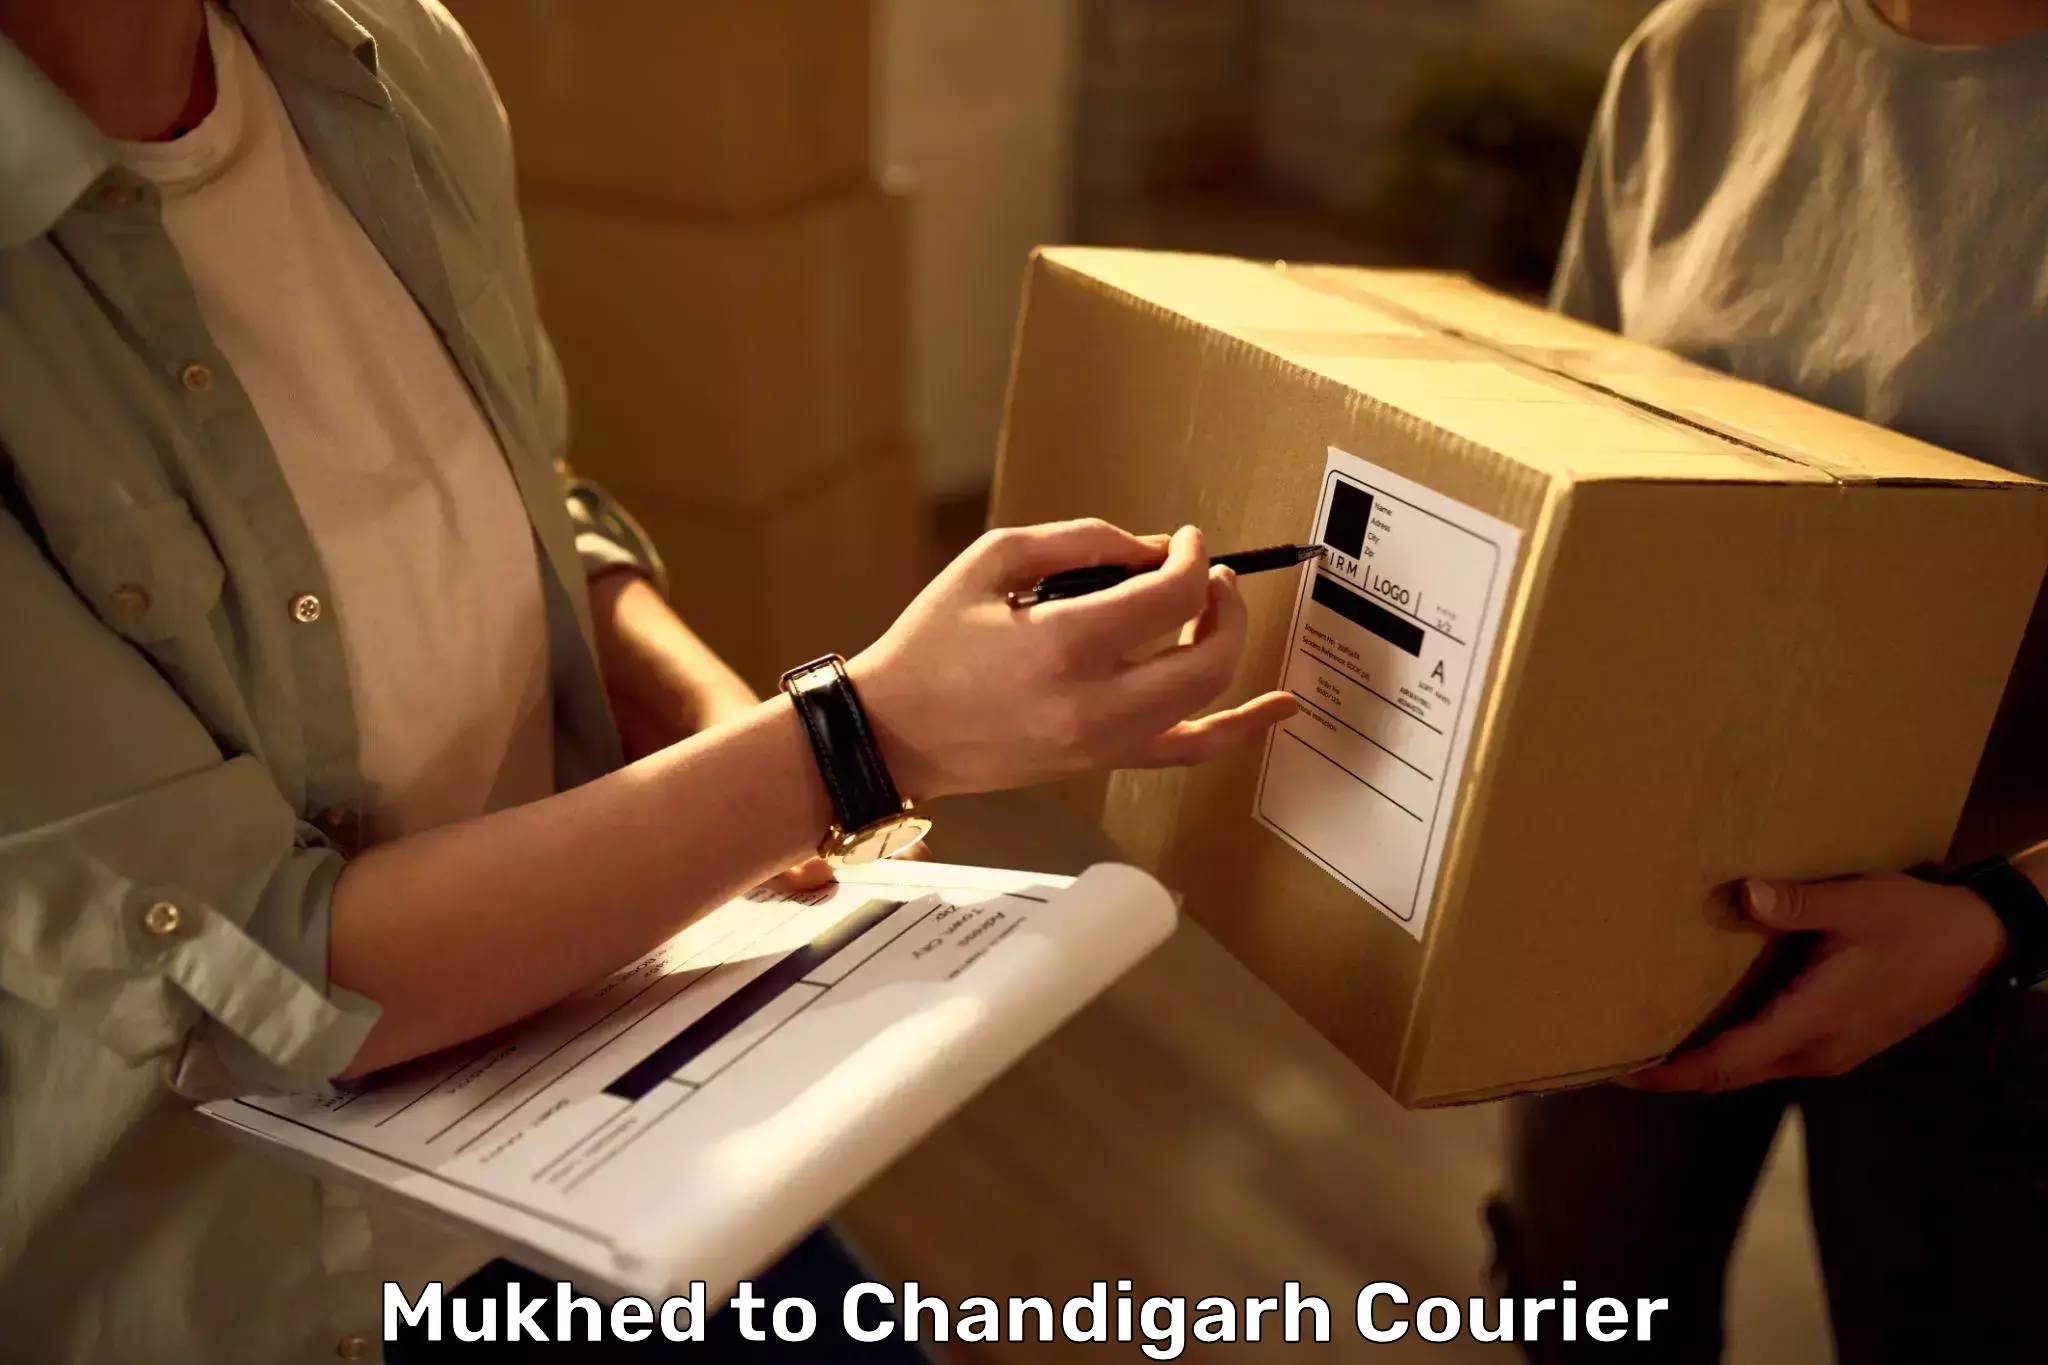 Luggage transport consultancy Mukhed to Chandigarh